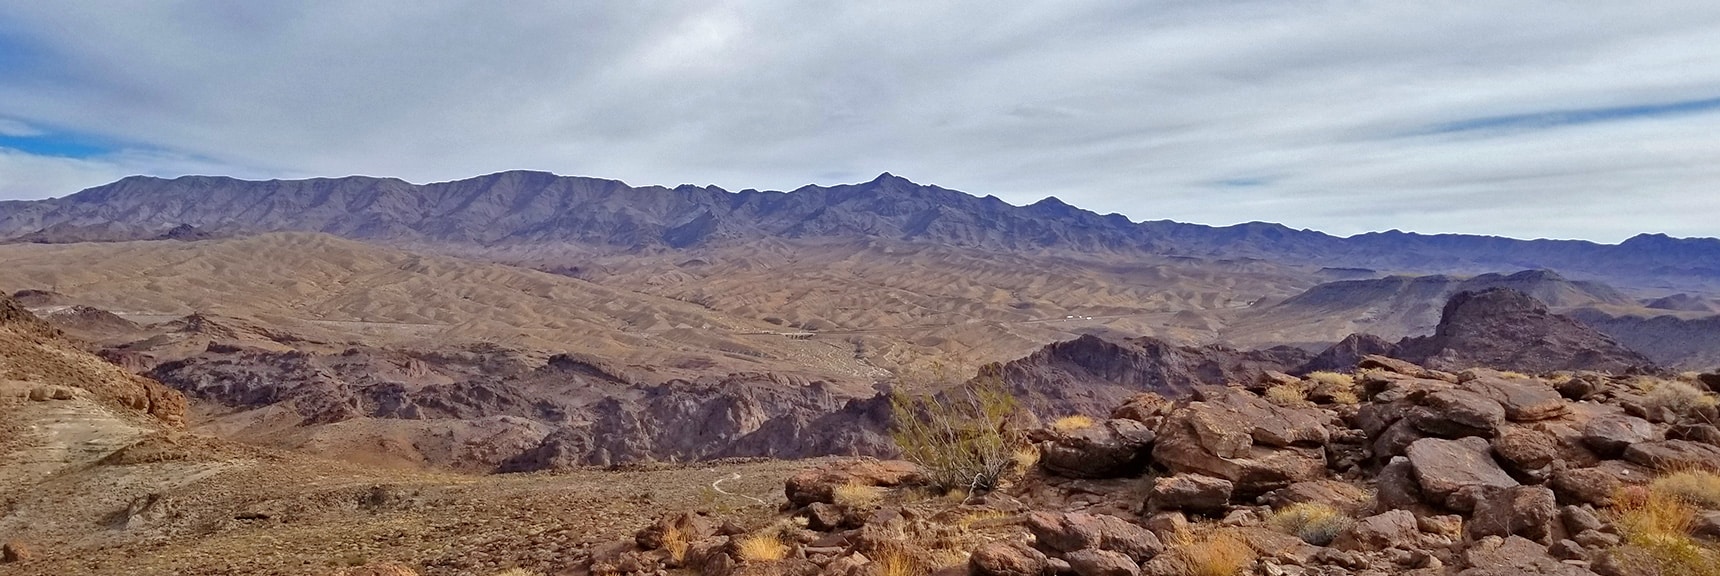 View East Across Canyon to Black Mts. Mt. Wilson High Point. | Arizona Hot Spring | Liberty Bell Arch | Lake Mead National Recreation Area, Arizona